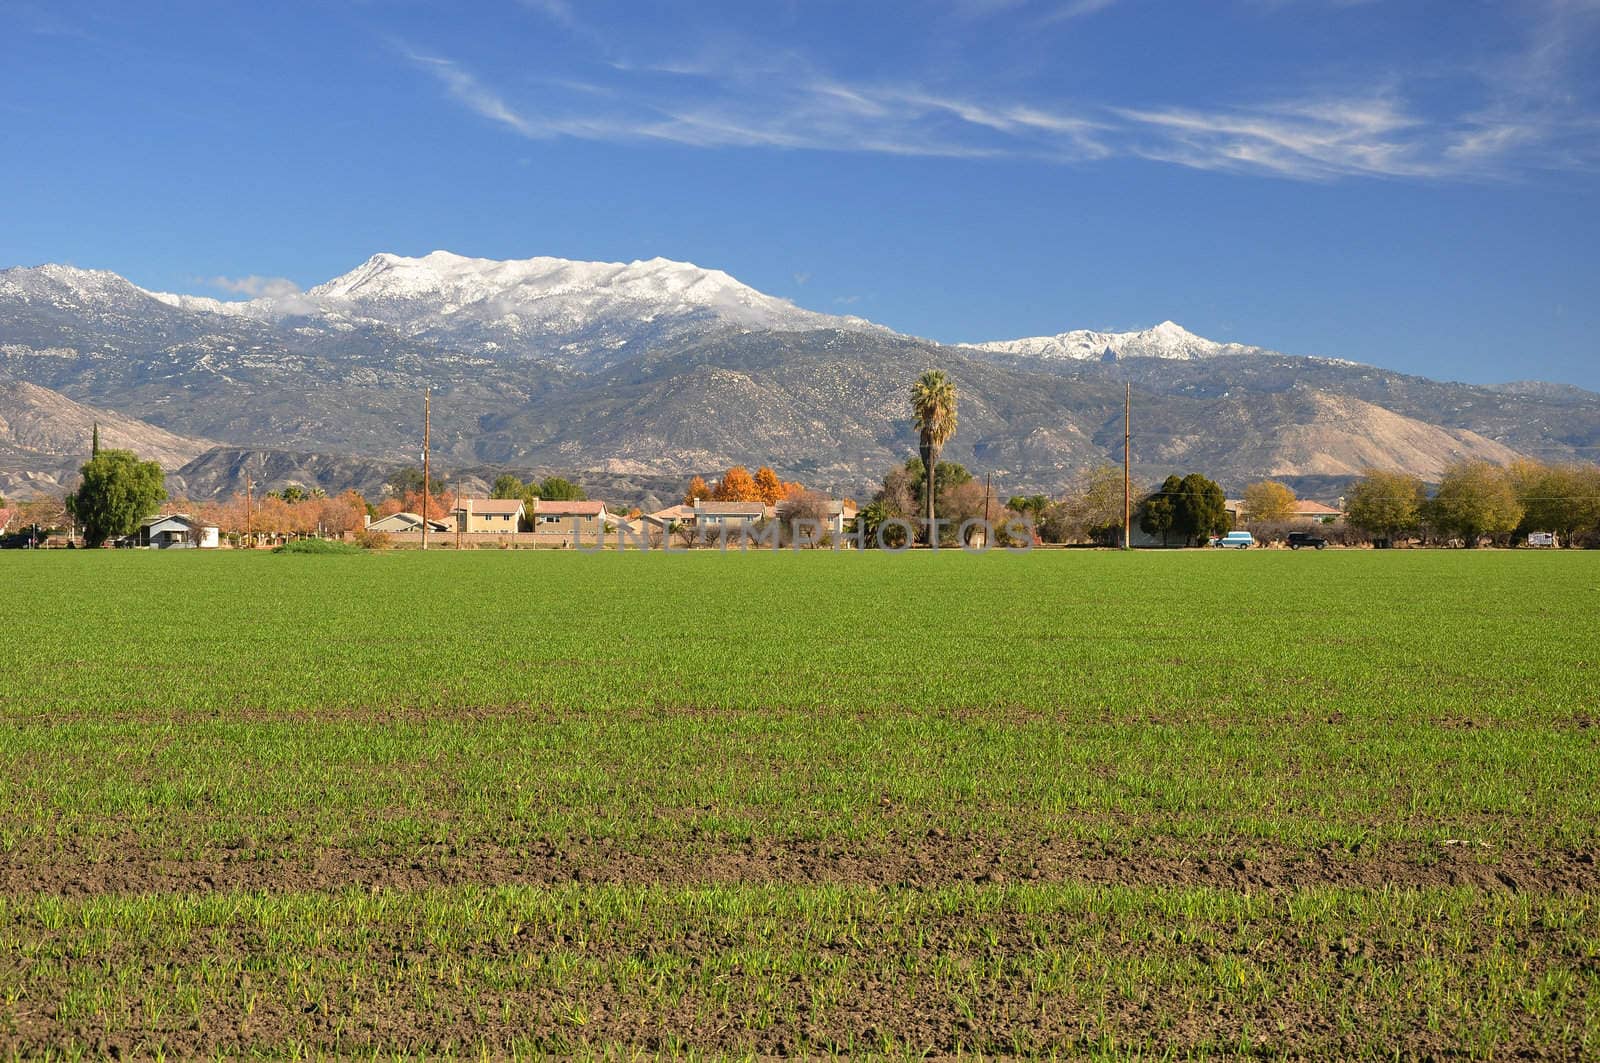 Looking at snow-capped Mount San Jacinto from a farmland field in the valley below.